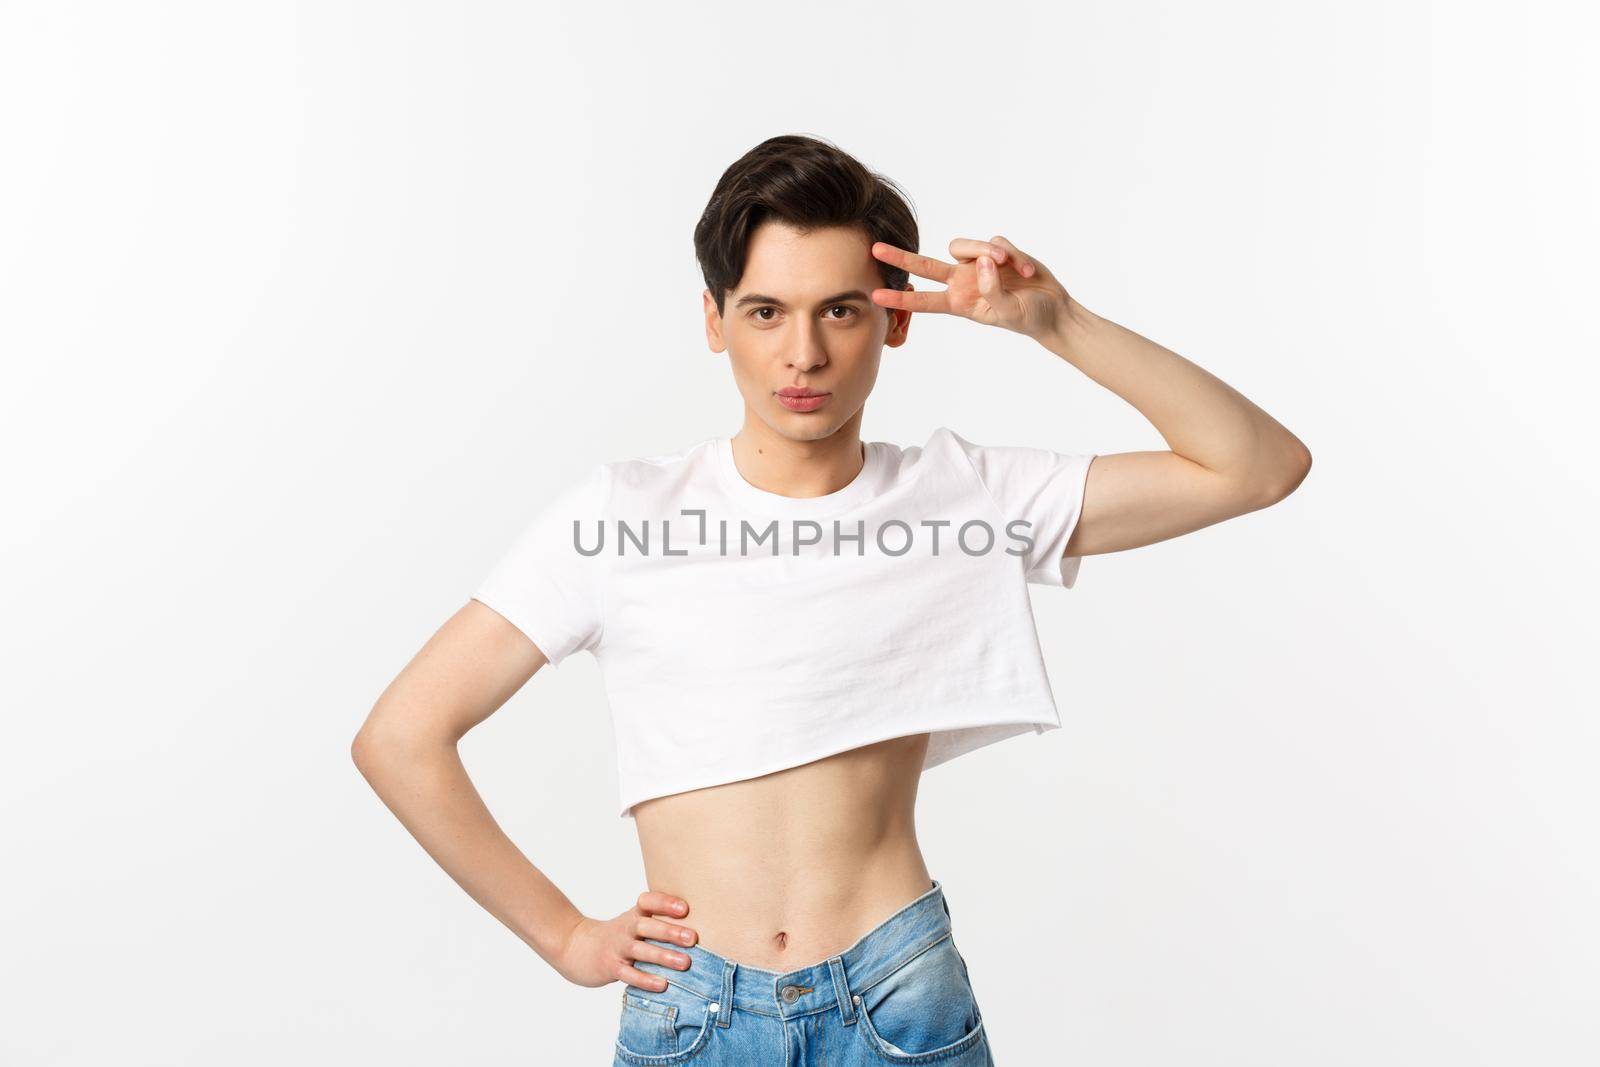 Beautiful androgynous man in crop top showing peace sign and smiling, standing over white background.